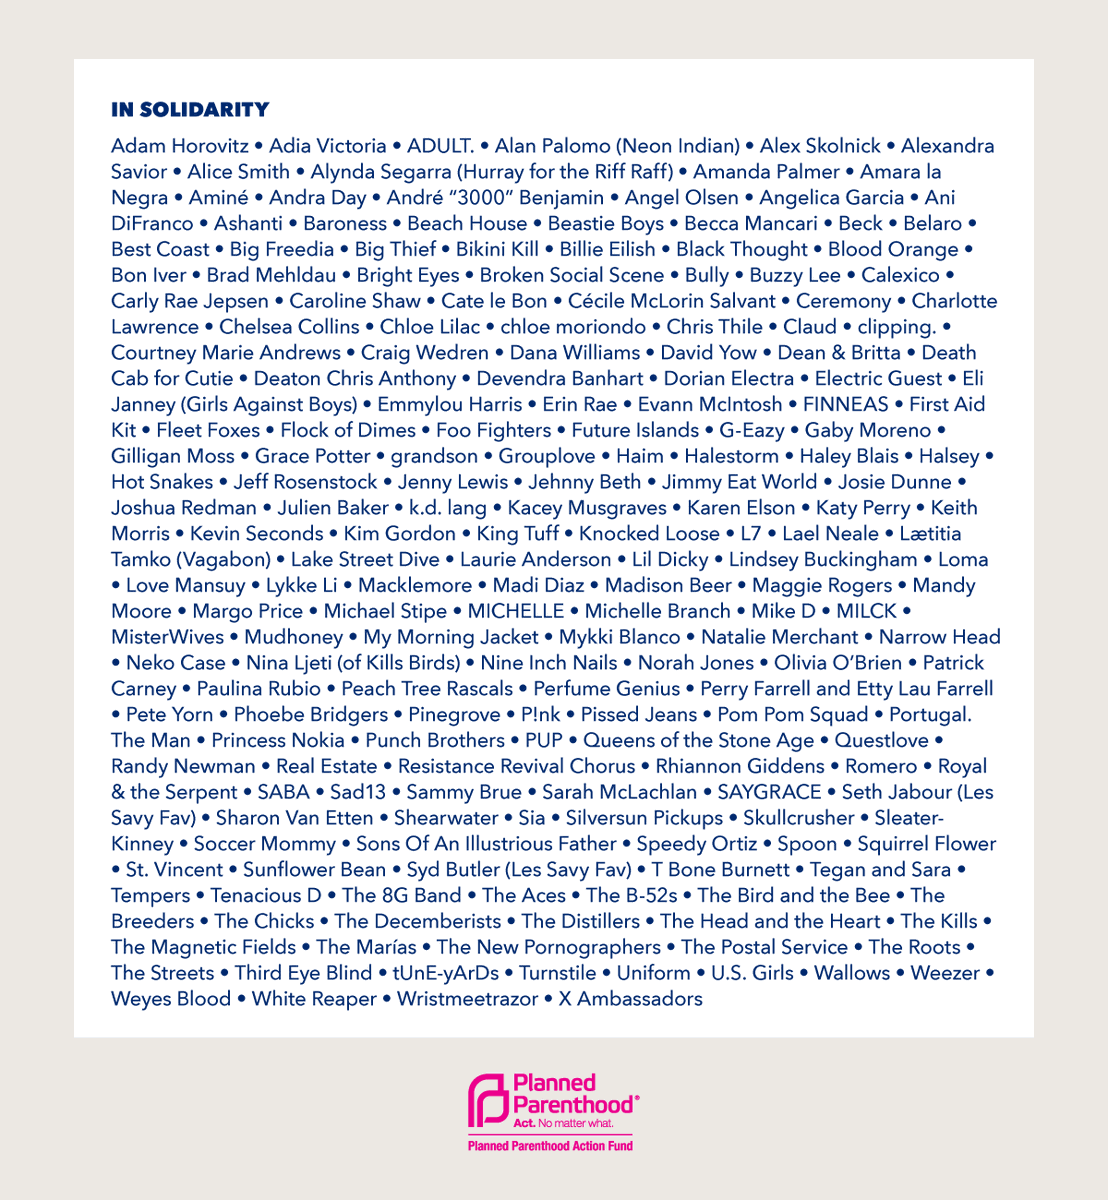 Voting shapes our lives & has lasting effects. This election will determine our health, rights & future. NIN have joined almost 200 artists in Planned Parenthood’s Action Fund initiative, encouraging everyone to make a plan to vote & be heard. Text PLAN to 22422  #WeNeedEveryVoice